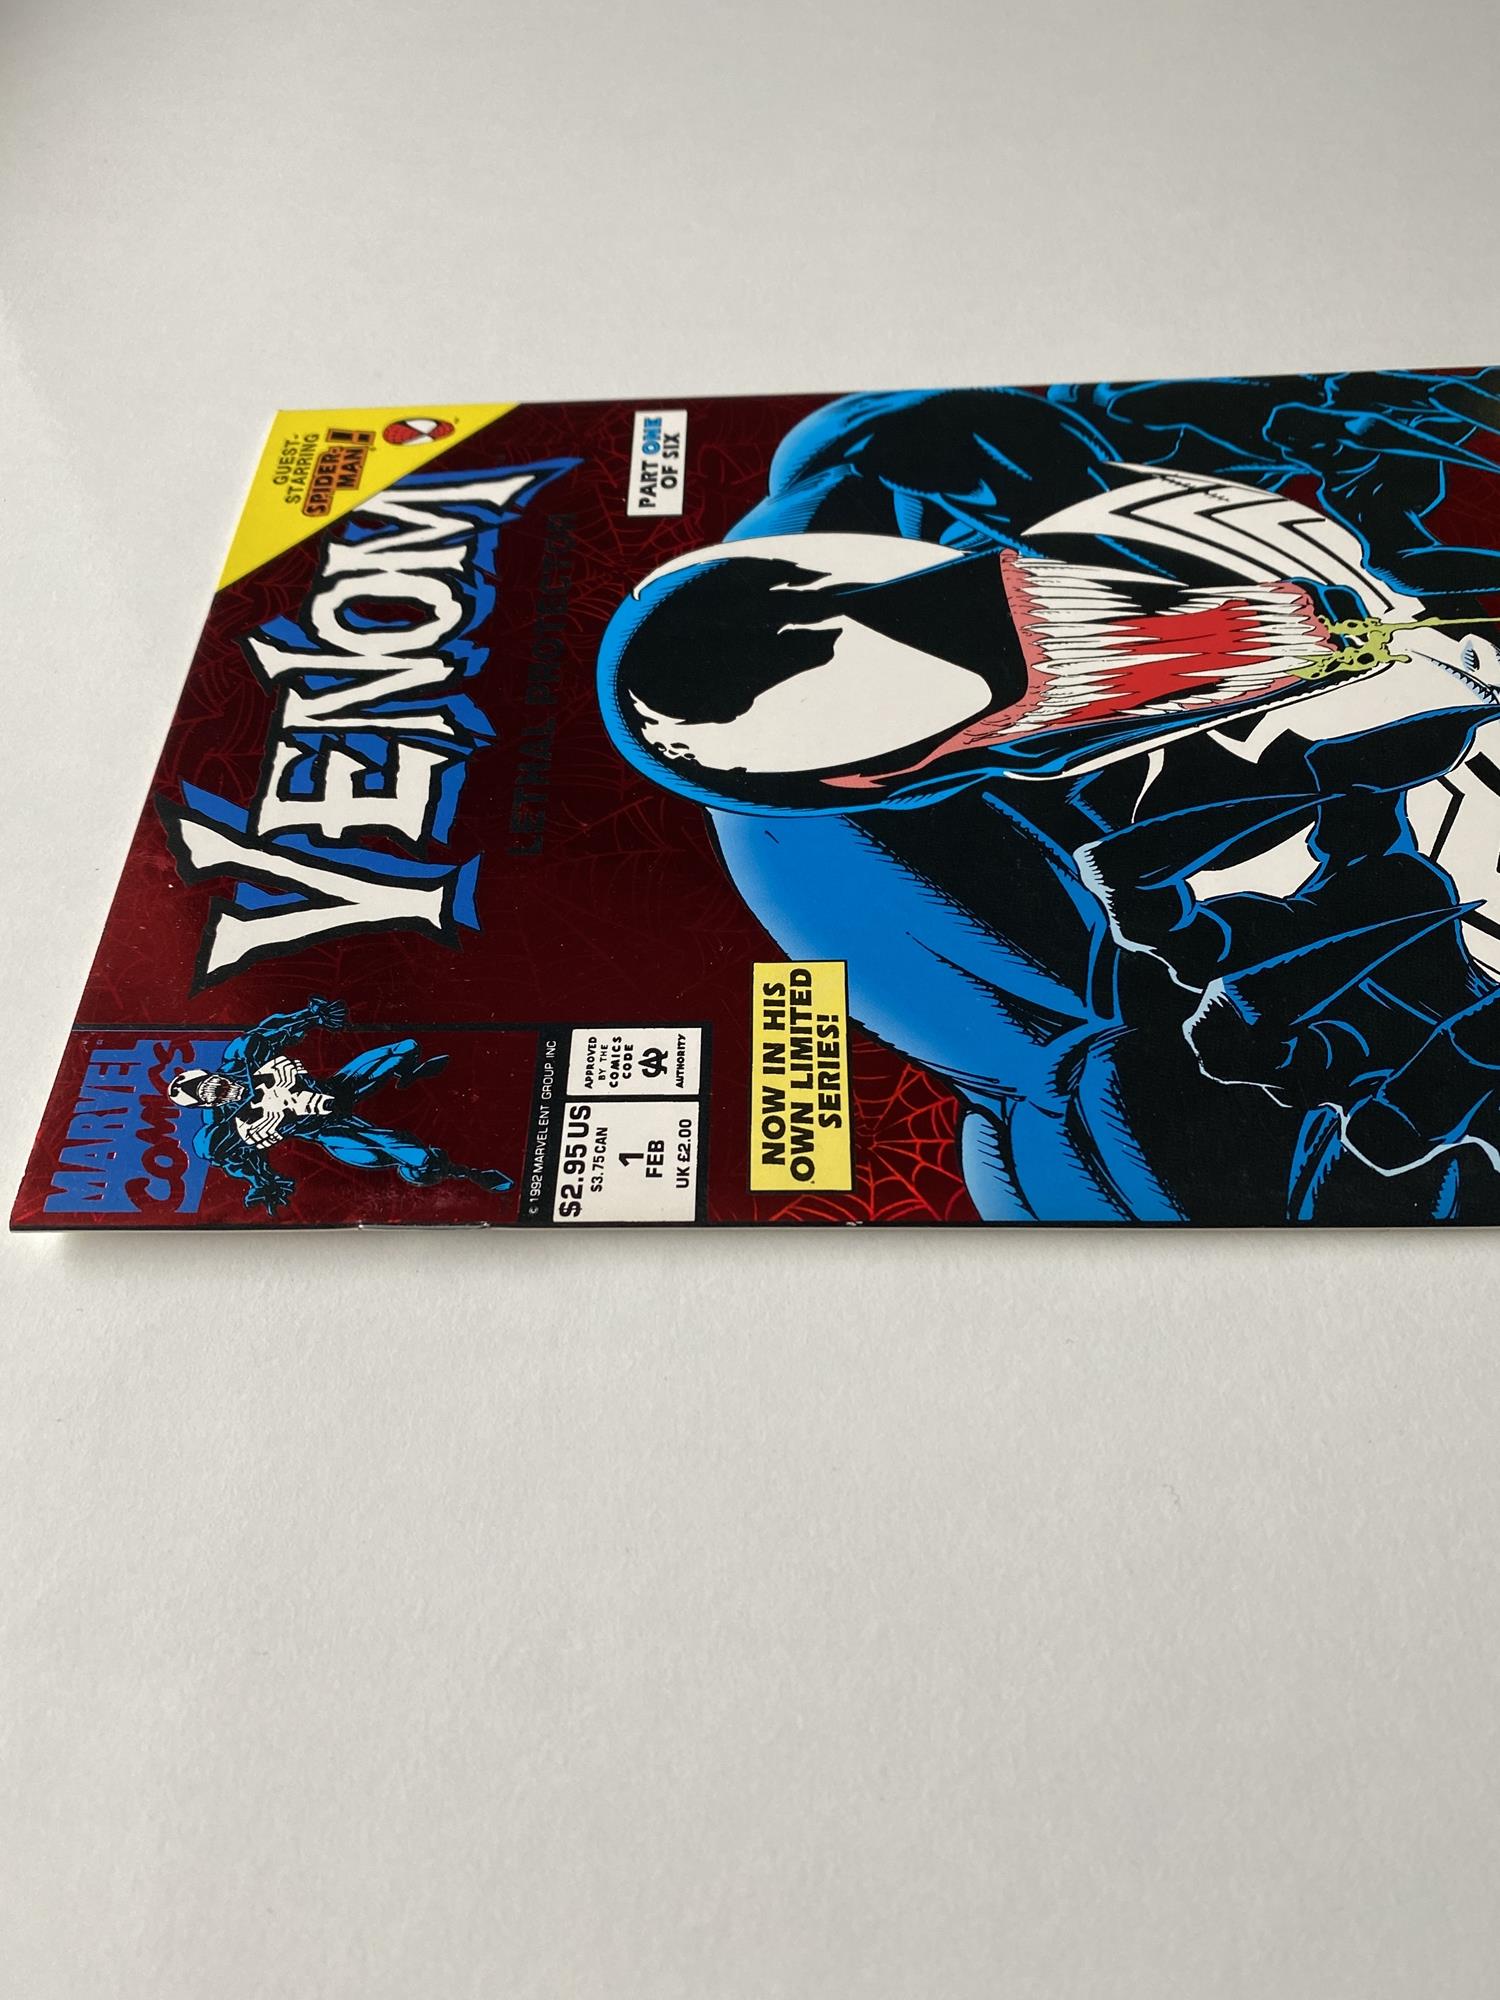 VENOM: LETHAL PROTECTOR # 1 (1993 - MARVEL - Cents/Pence Copy) - First Venom solo title + Spider-Man - Image 6 of 7